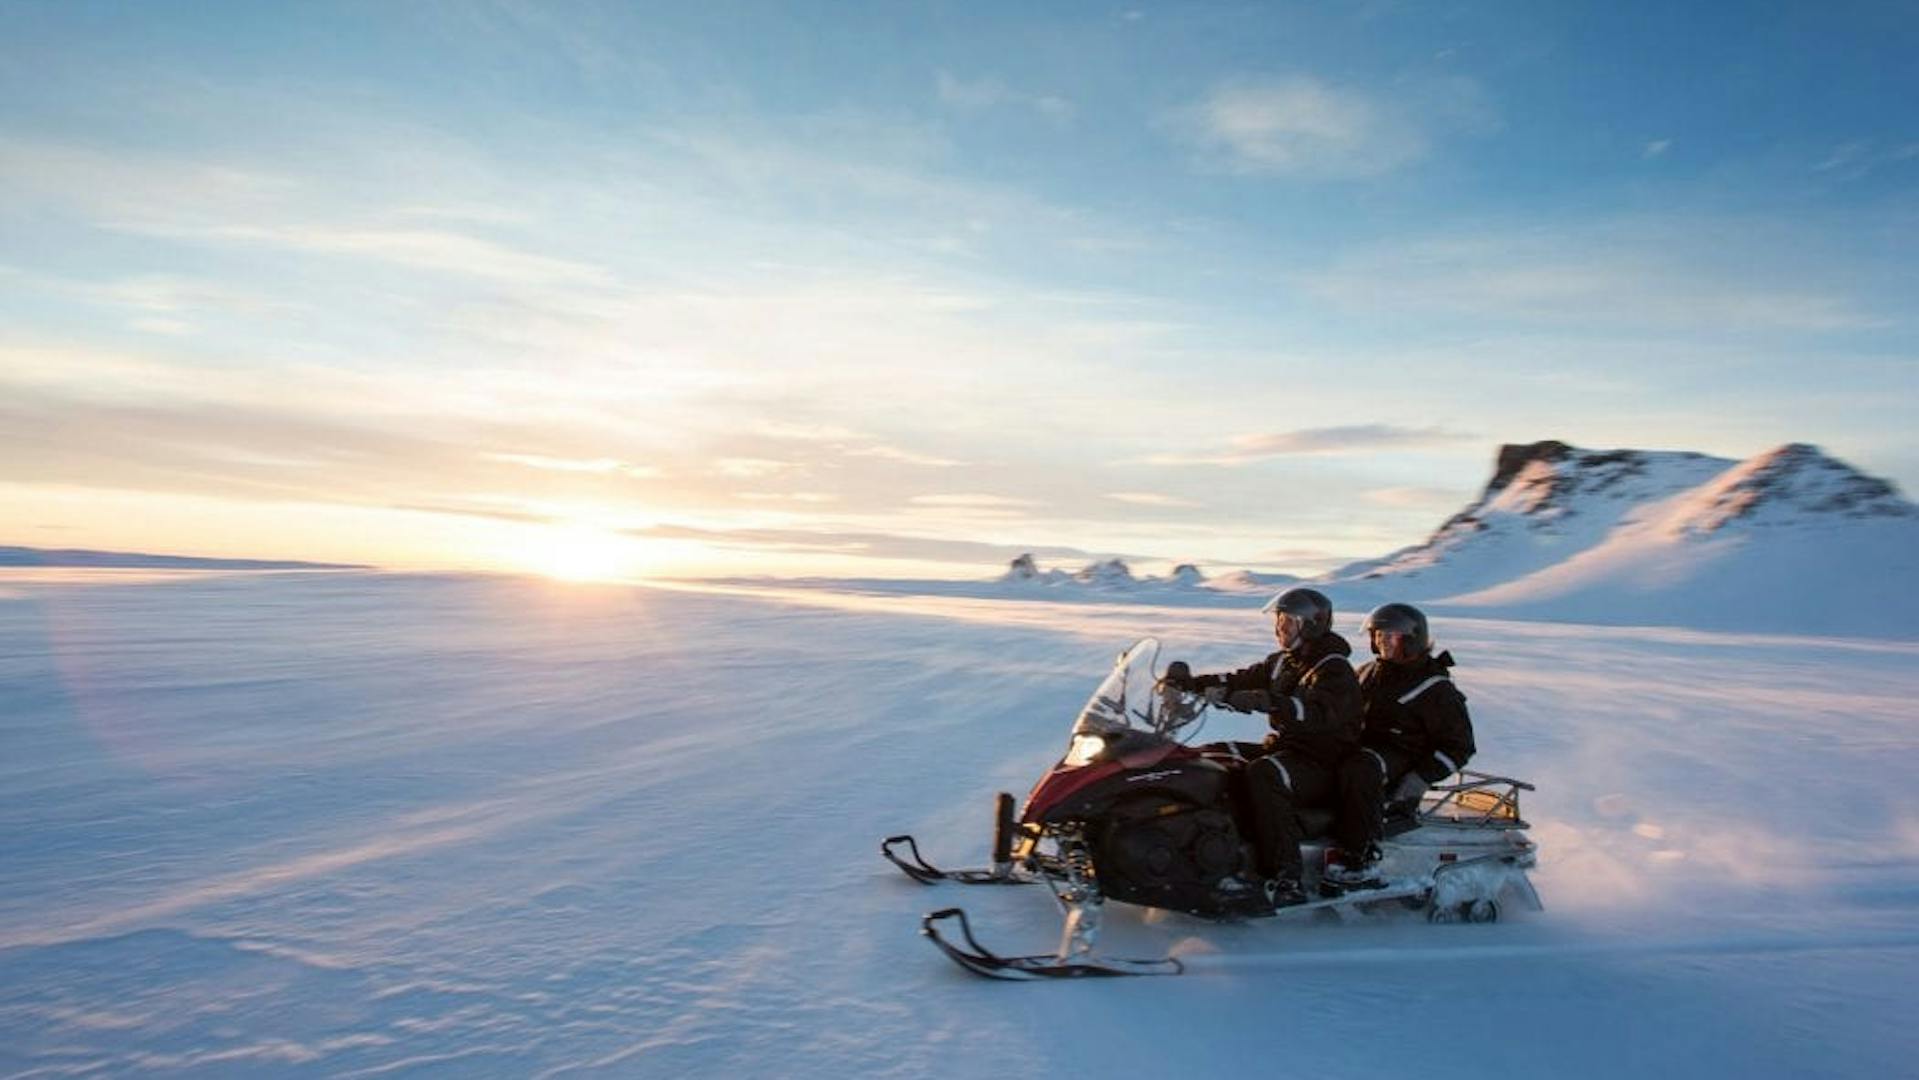 Two people share a snowmobile while they ride over a glacier; the sky is clear blue, the sun is coming up on the horizon, and mountain peaks are in the background.